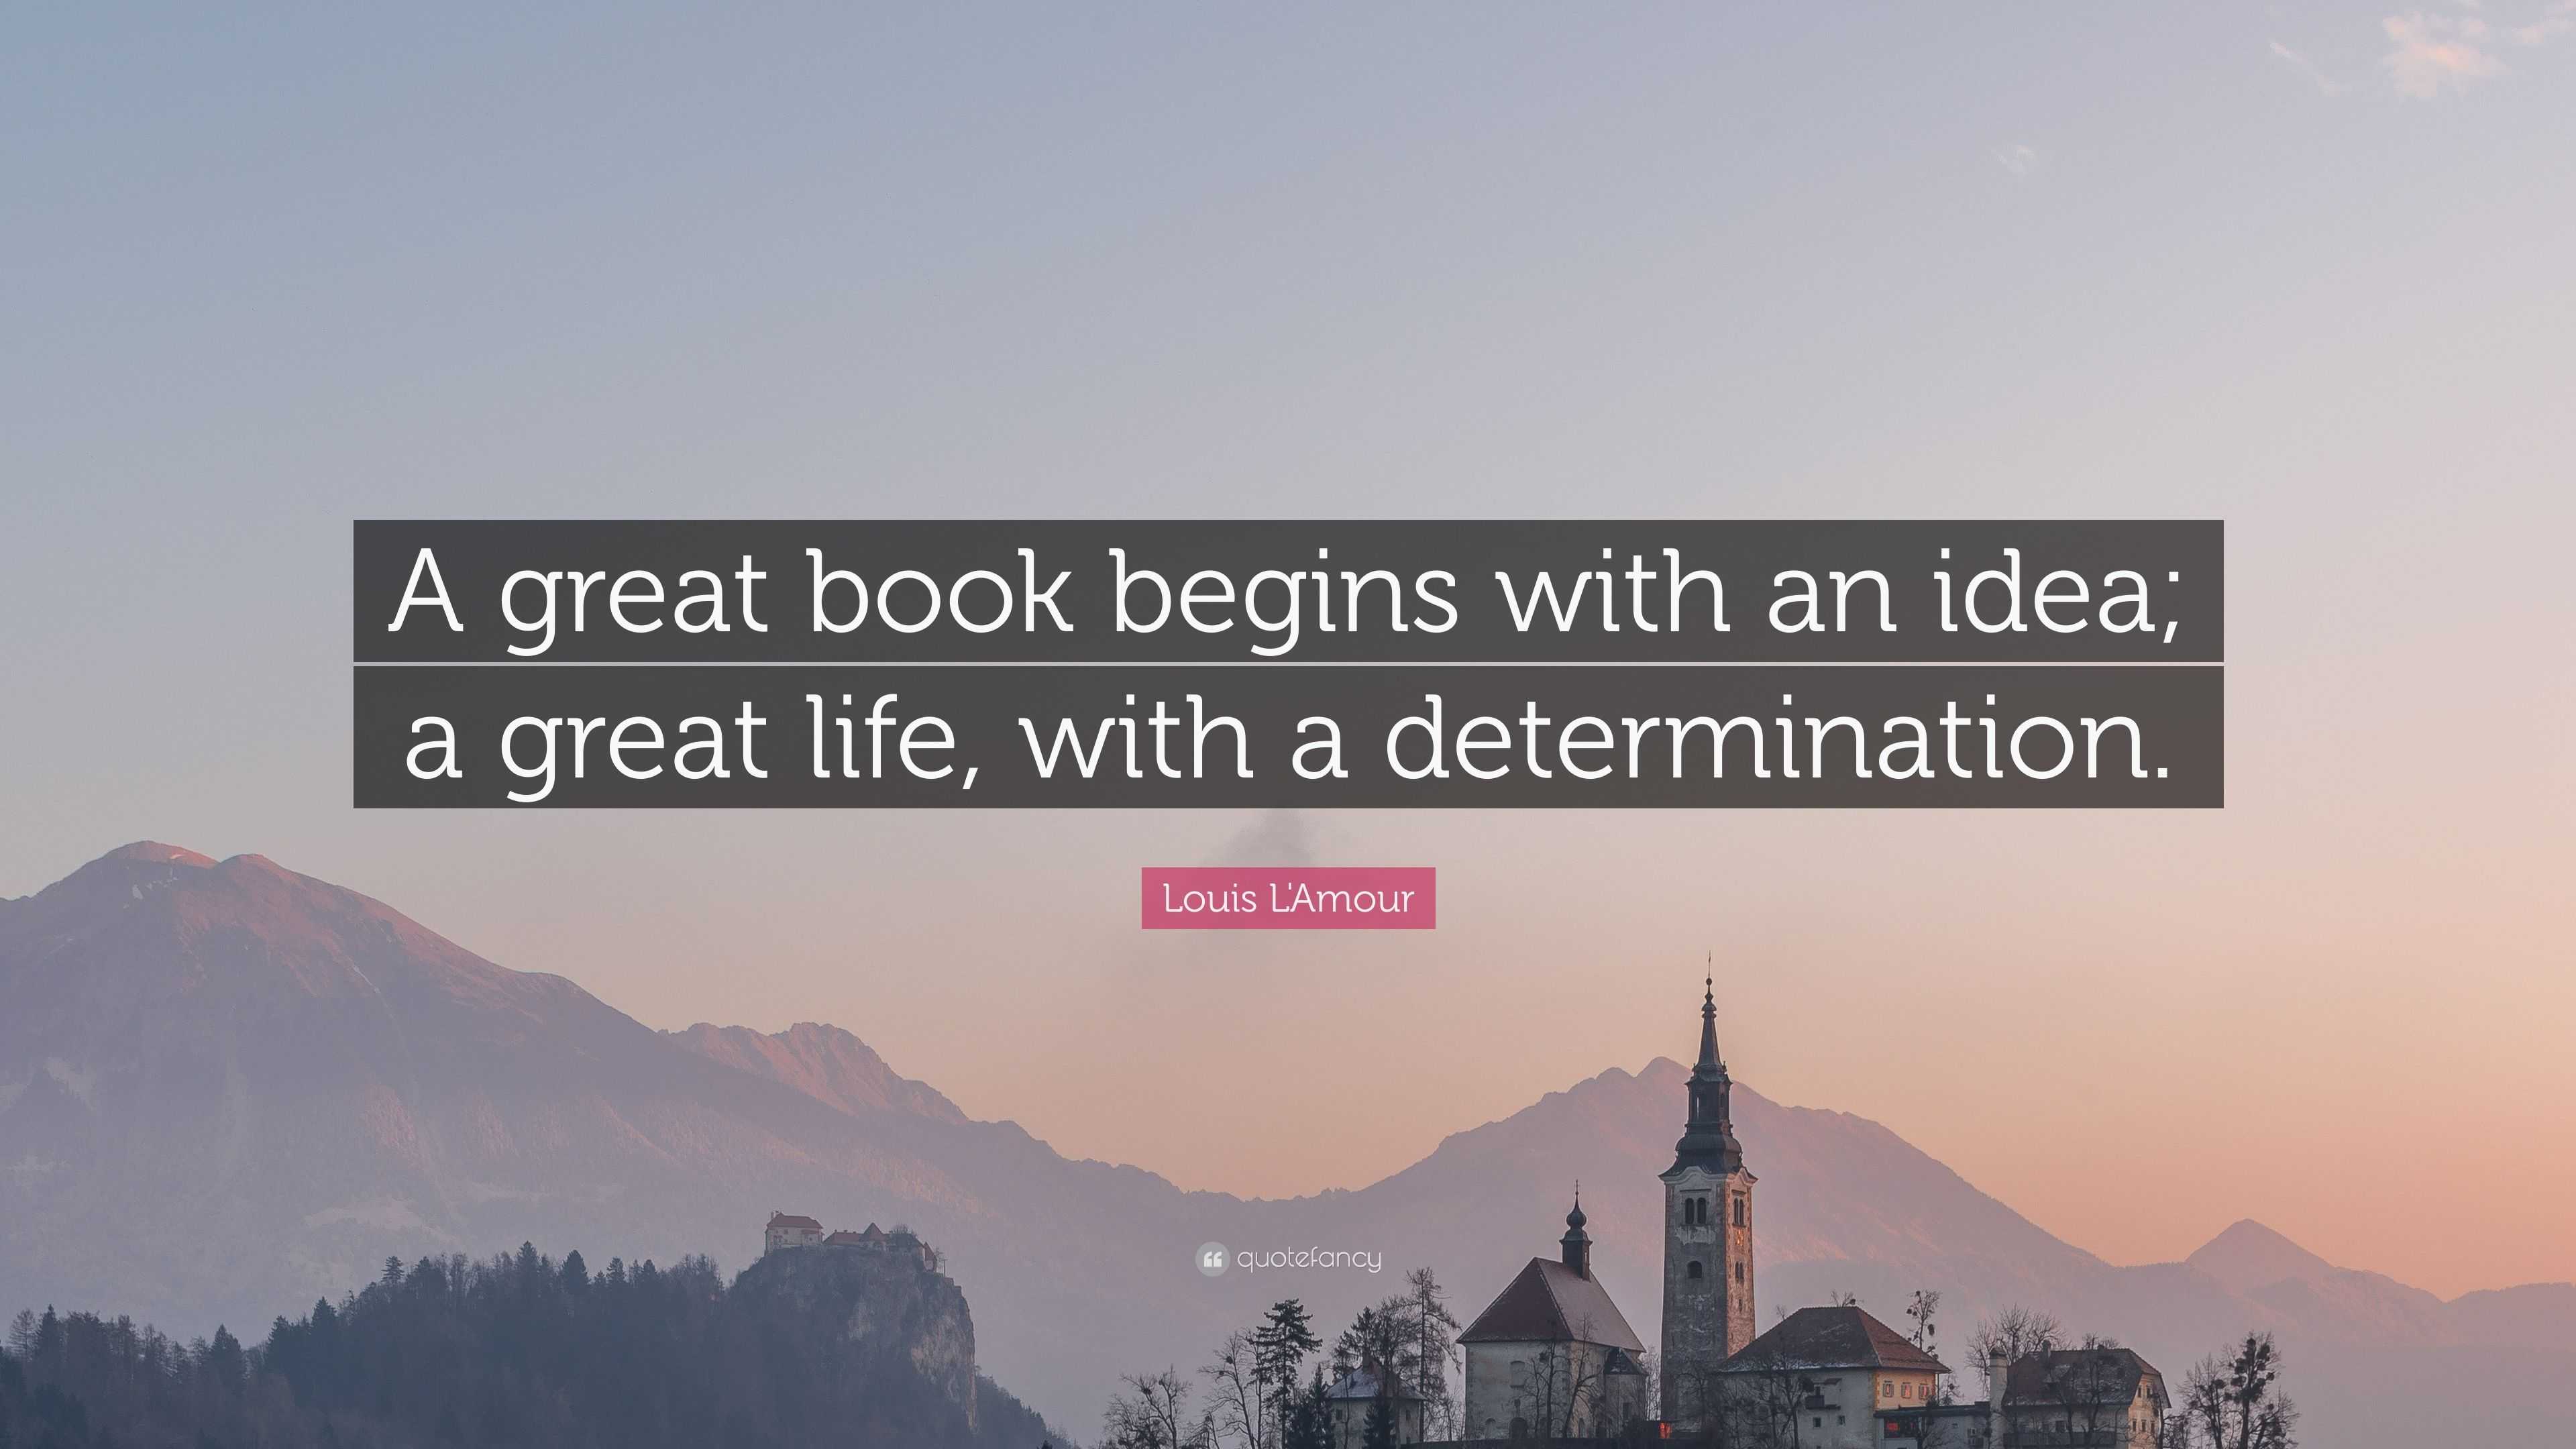 Louis L&#39;Amour Quote: “A great book begins with an idea; a great life, with a determination.” (7 ...